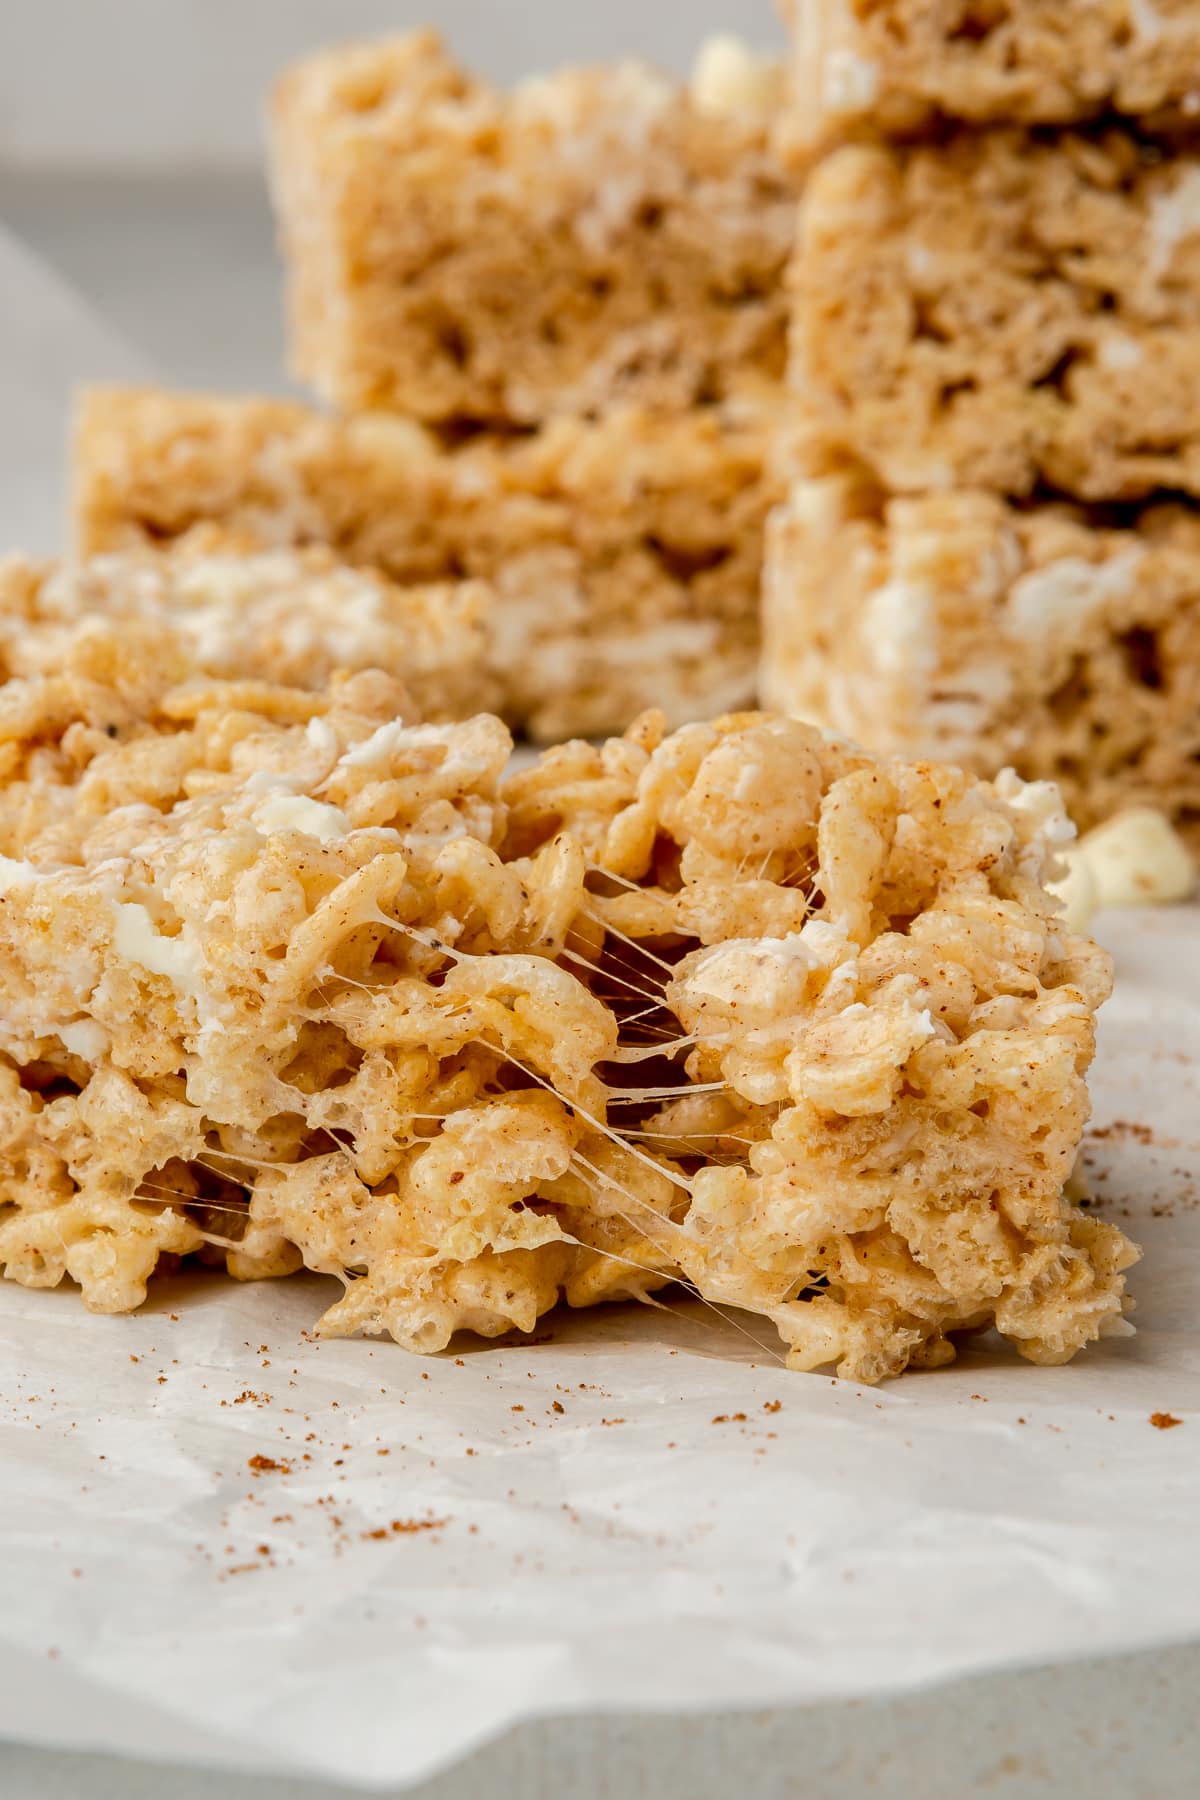 A Pumpkin Spice Rice Krispie Treat that has been slightly pulled apart to show gooey strings of marshmallow.